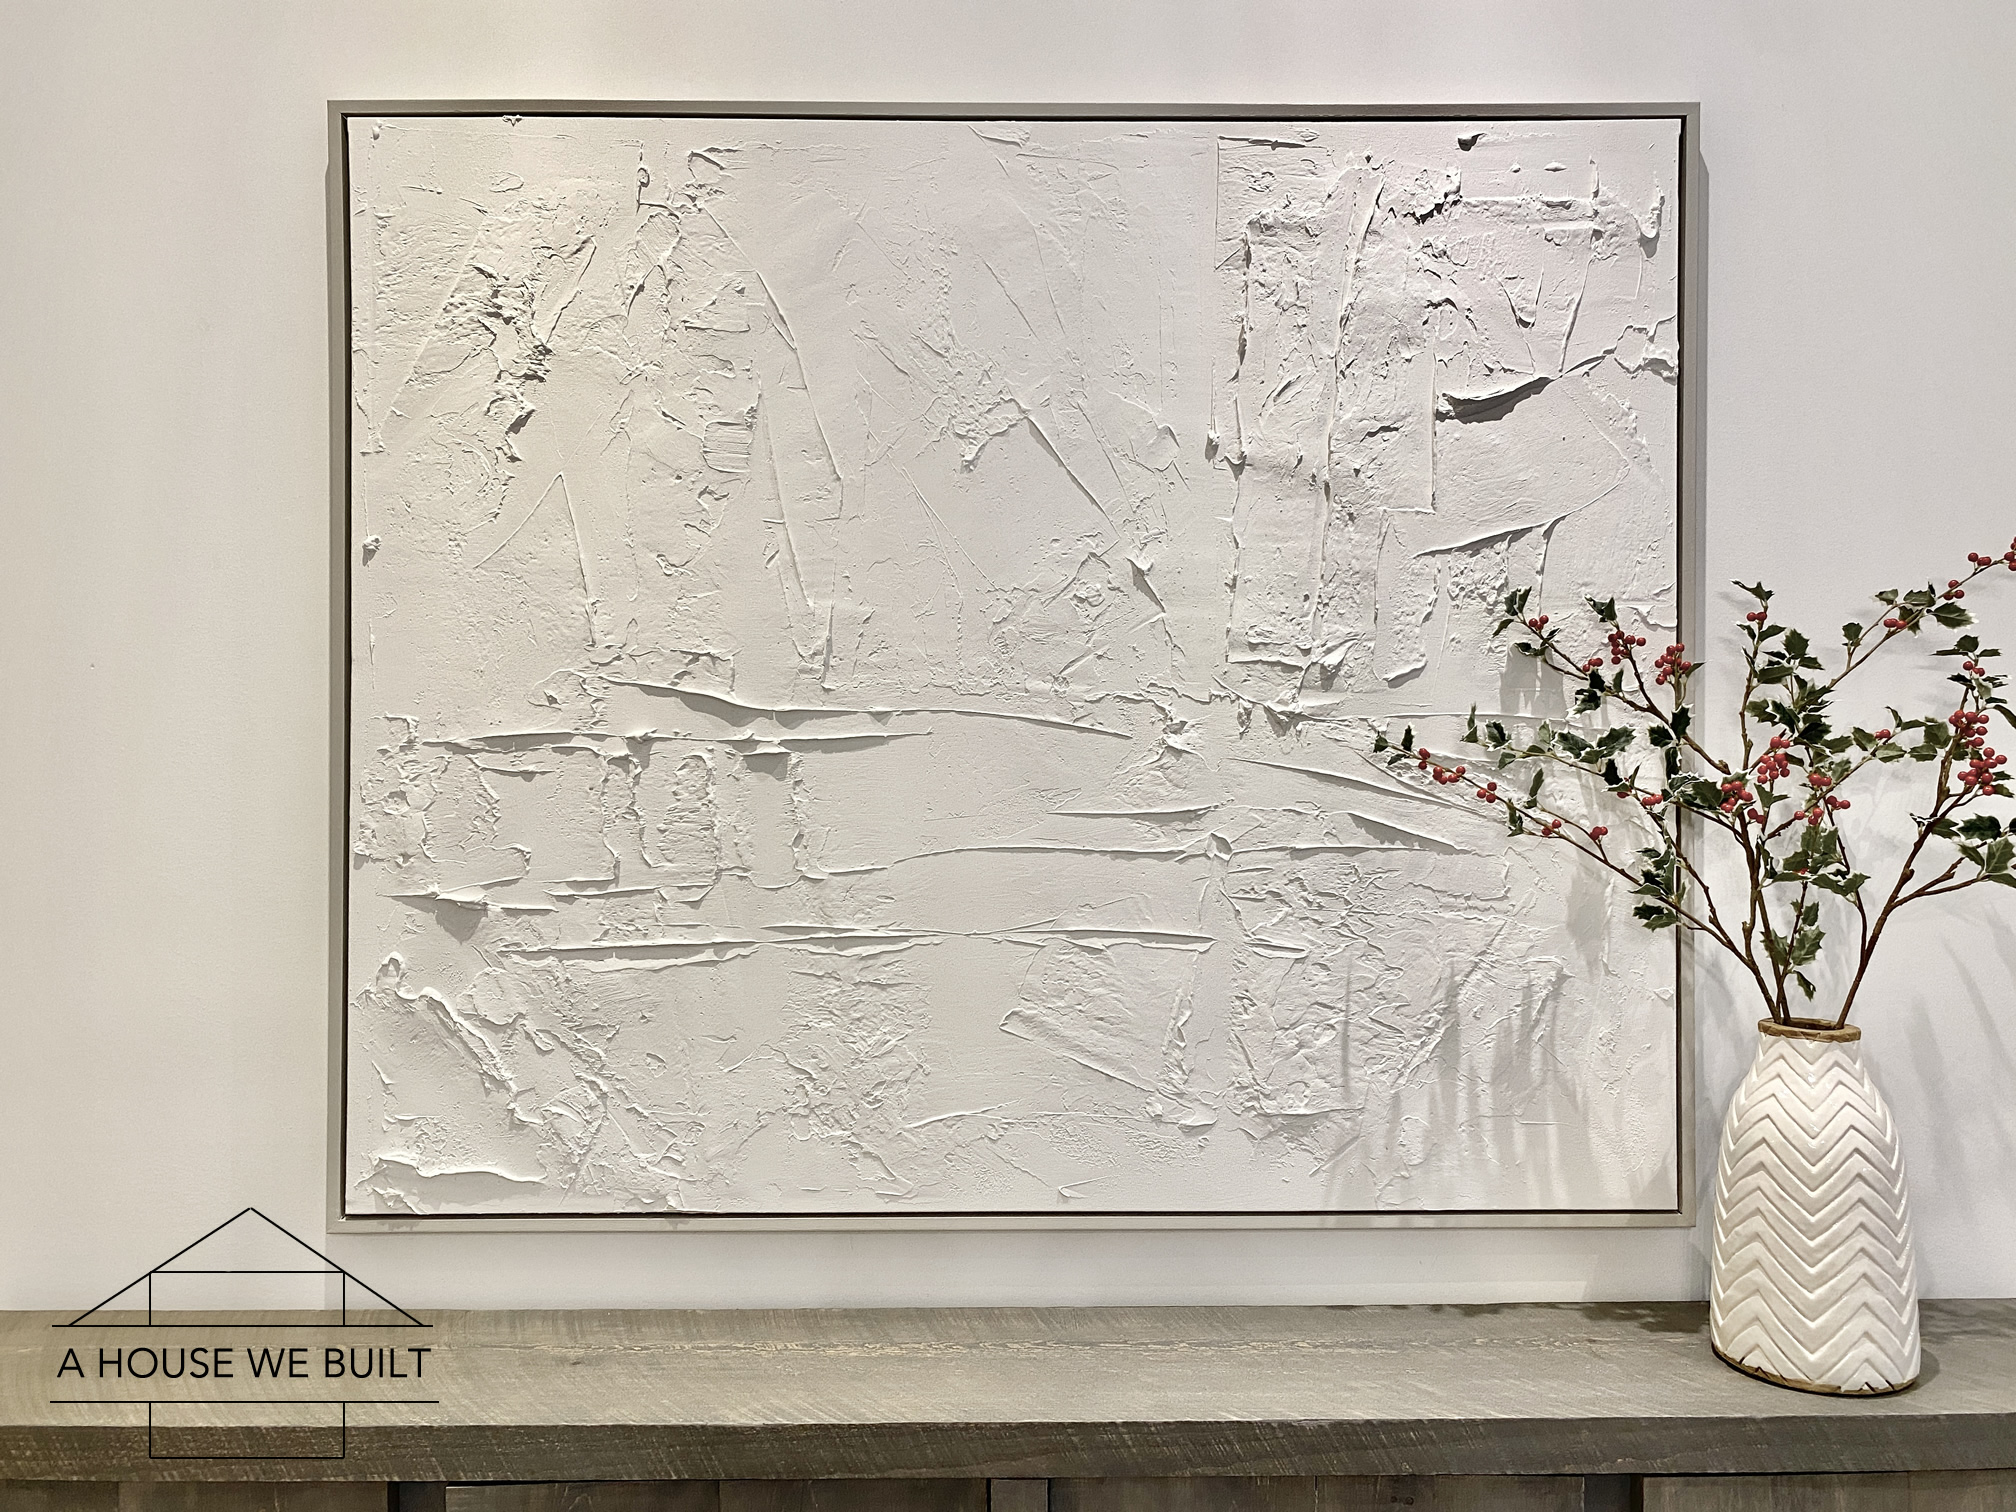 Plaster Coated Concrete Wall Texture A Horizontal Blank Canvas